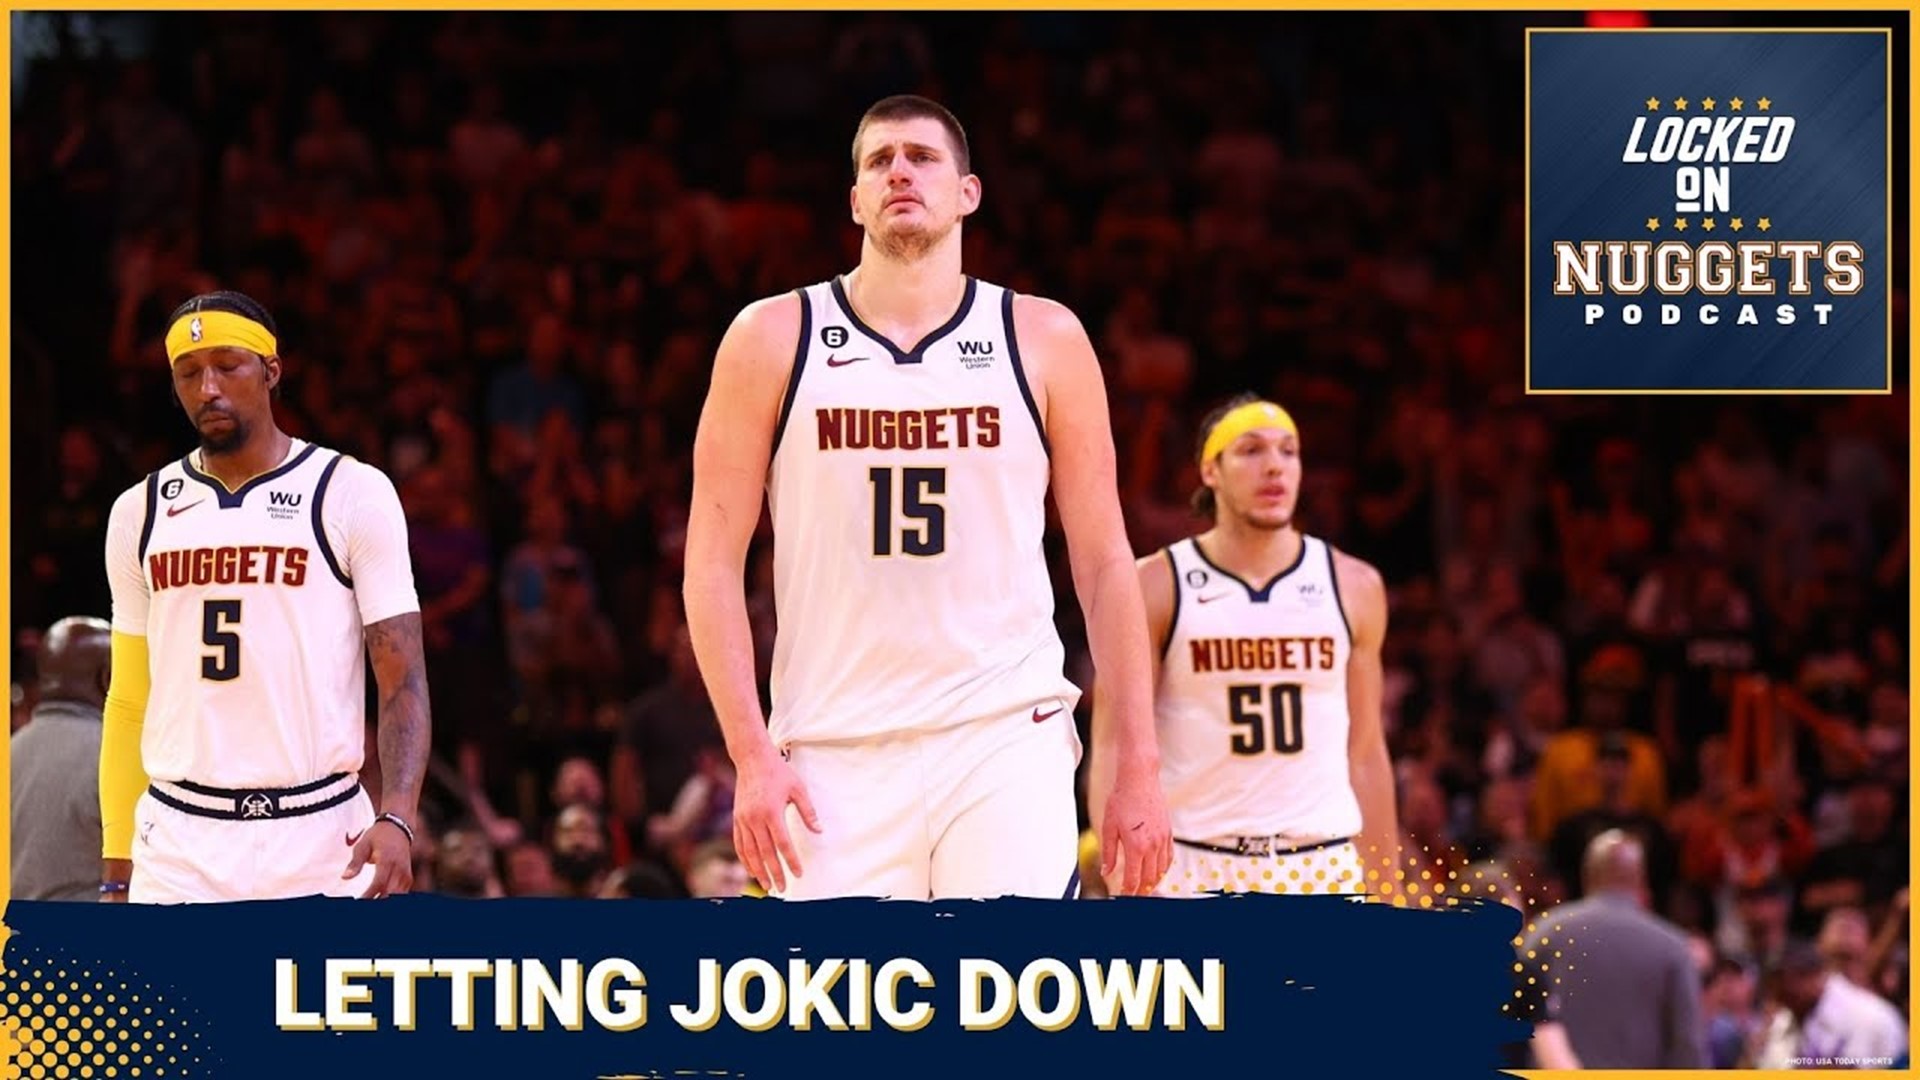 Nikola Jokic has an all-time performance... but in a loss. A career high 53 points with 11 assists for Joker but the Nuggets' comeback falls short.